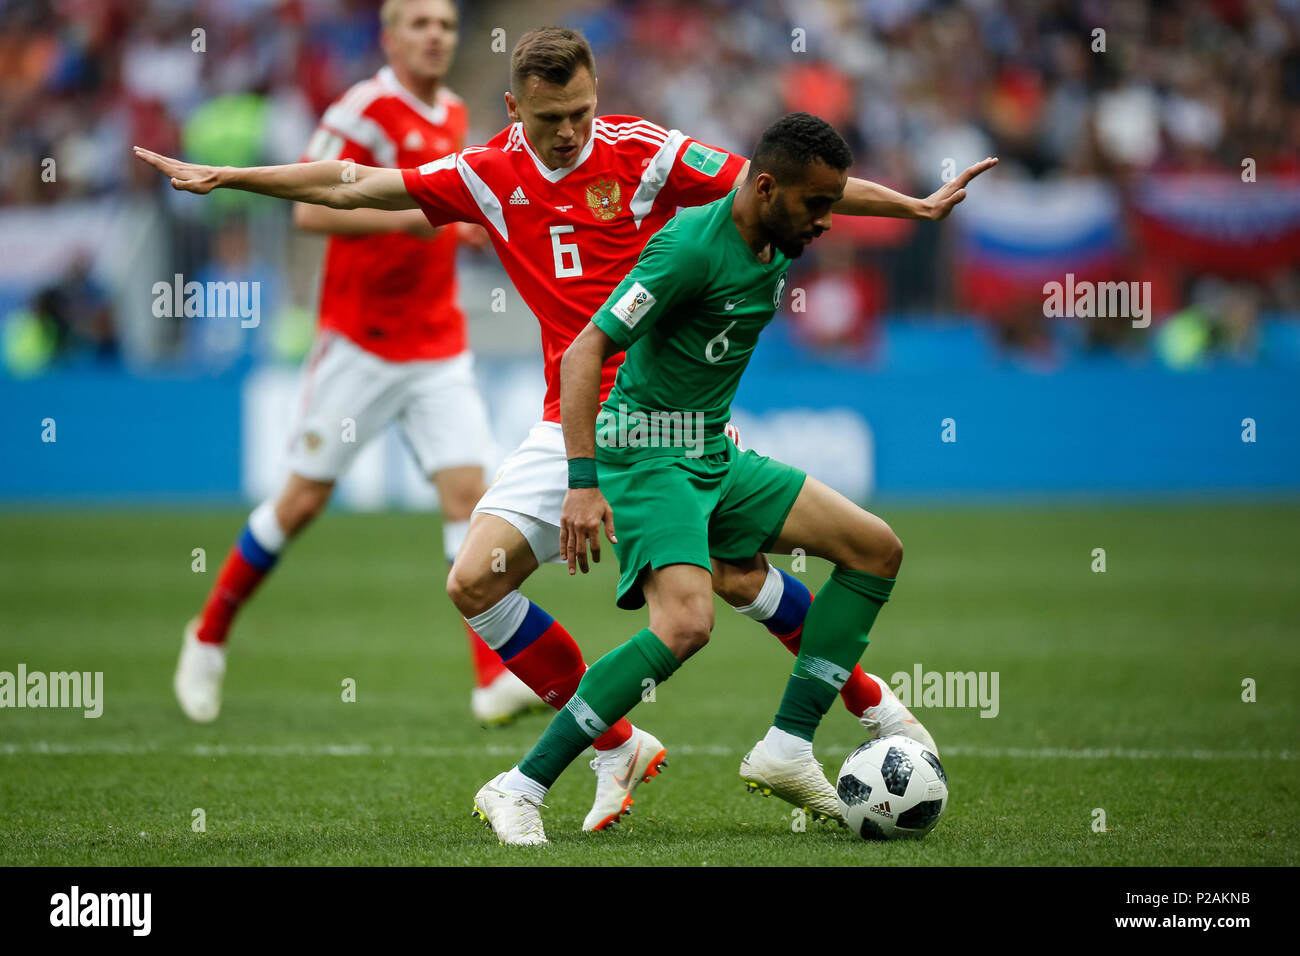 Moscow, Russia. 14th June 2018. Denis Cheryshev of Russia and Mohammed Al-Breik of Saudi Arabia during the 2018 FIFA World Cup Group A match between Russia and Saudi Arabia at Luzhniki Stadium on June 14th 2018 in Moscow, Russia. Credit: PHC Images/Alamy Live News Stock Photo